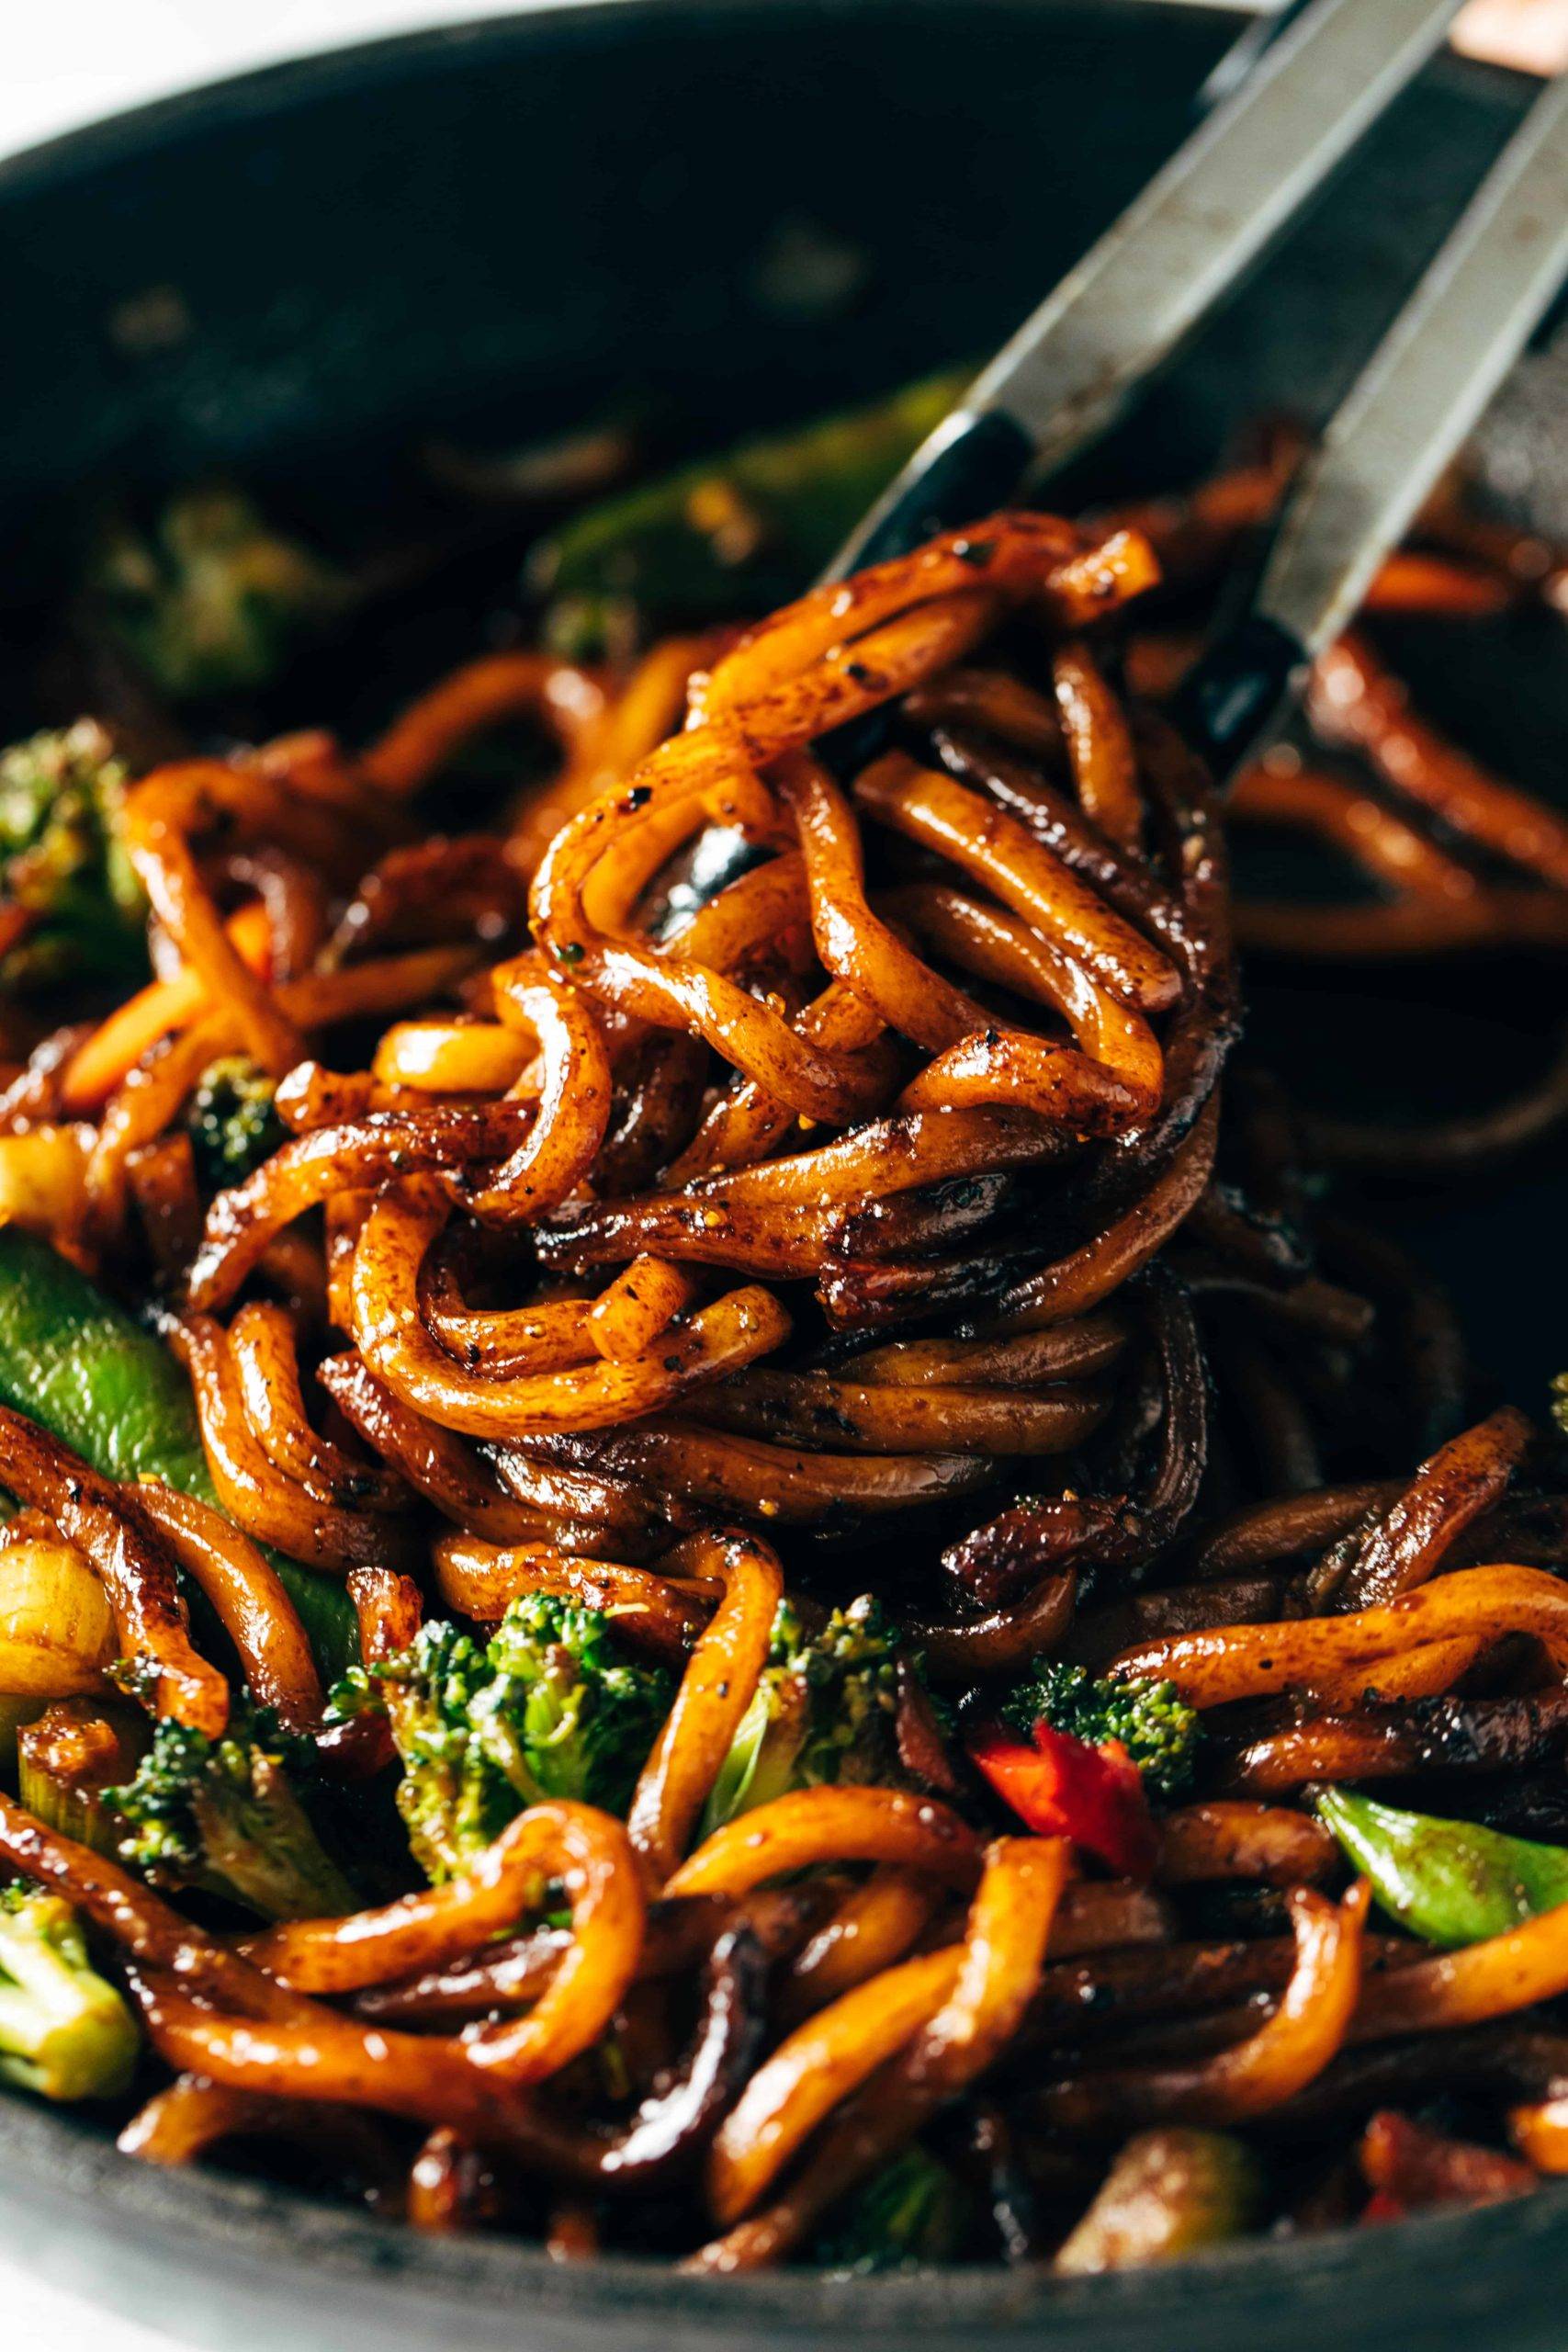 Udon Noodles mixed with fried vegetables and some black pepper in a cooking pan.